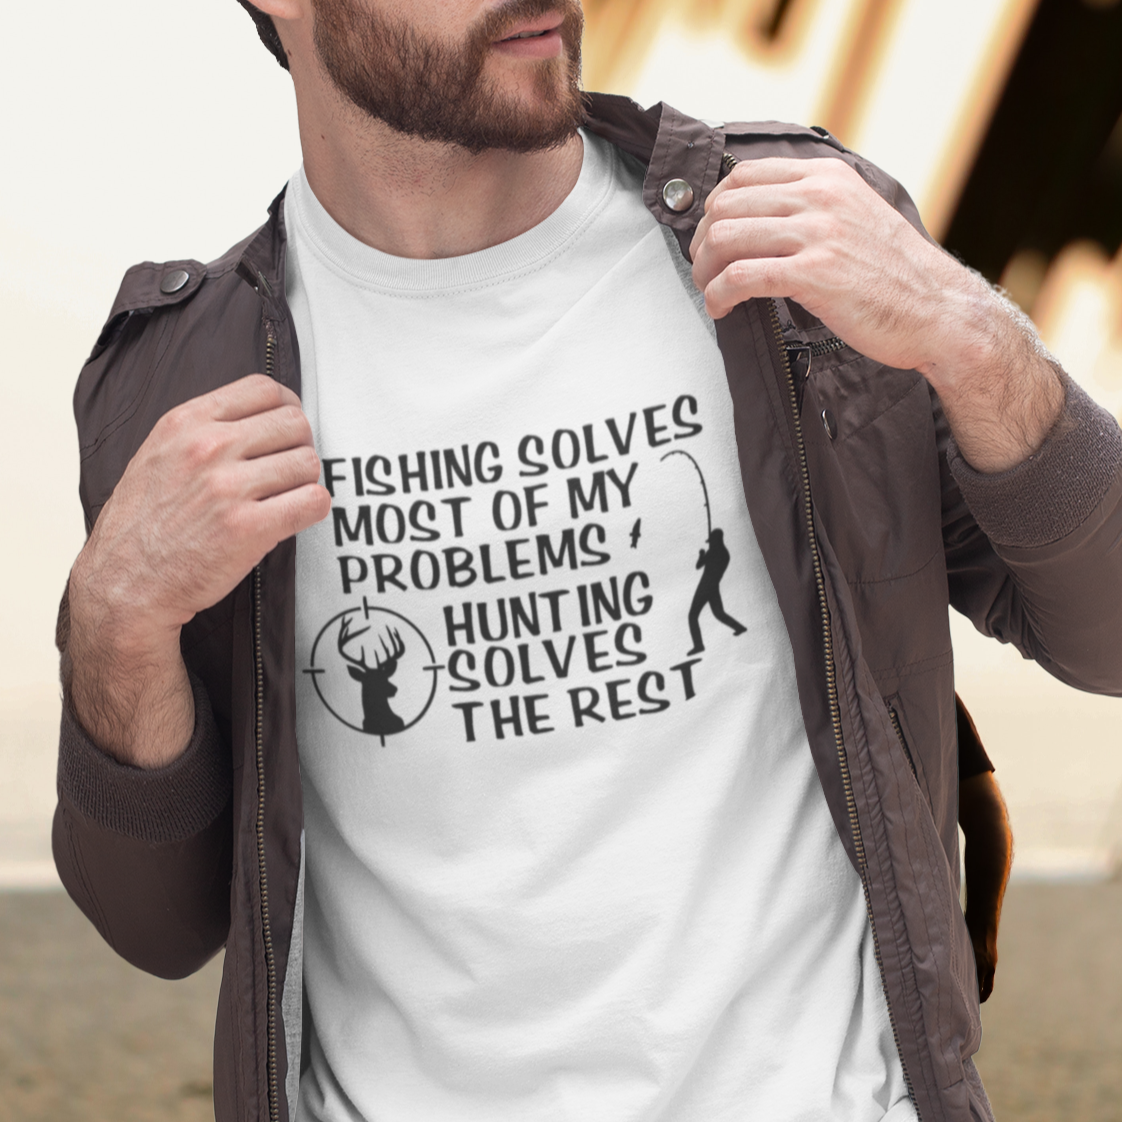 fishing-solves-most-of-my-problems-hunting-solves-the-rest-white-t-shirt-mockup-of-a-bearded-man-wearing-a-leather-jacket